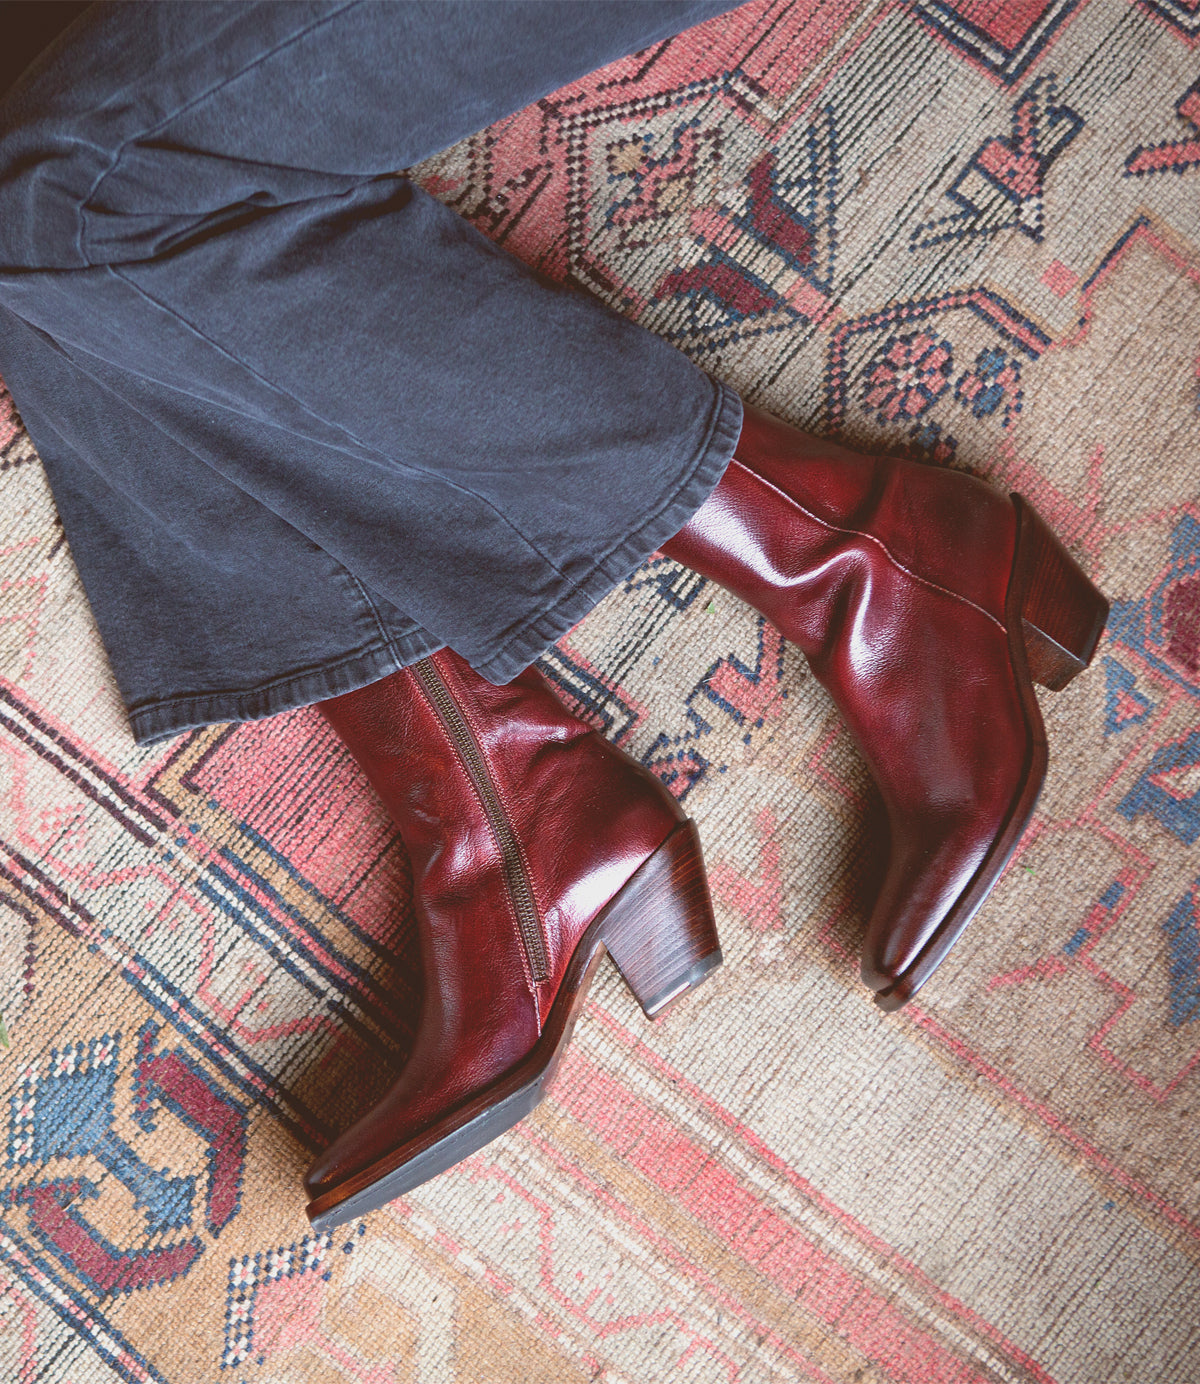 A woman donning a pair of Bed Stu Vendue high-quality leather red boots with a sleek silhouette on a cozy rug.